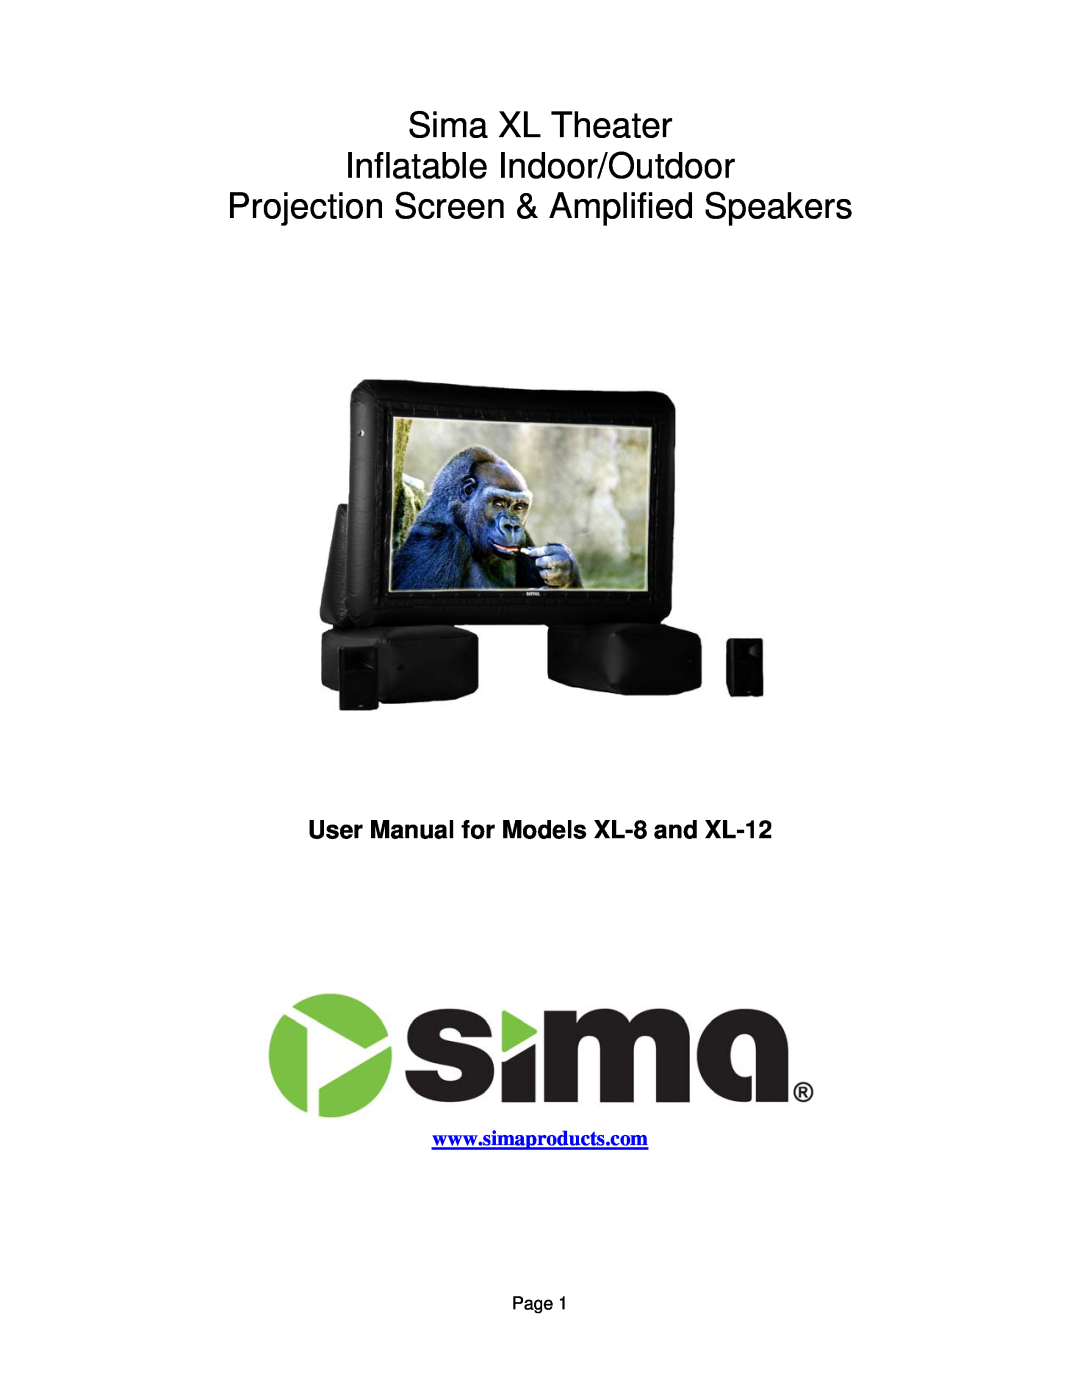 Sima Products XL-8, XL-12 user manual Sima XL Theater Inflatable Indoor/Outdoor, Projection Screen & Amplified Speakers 